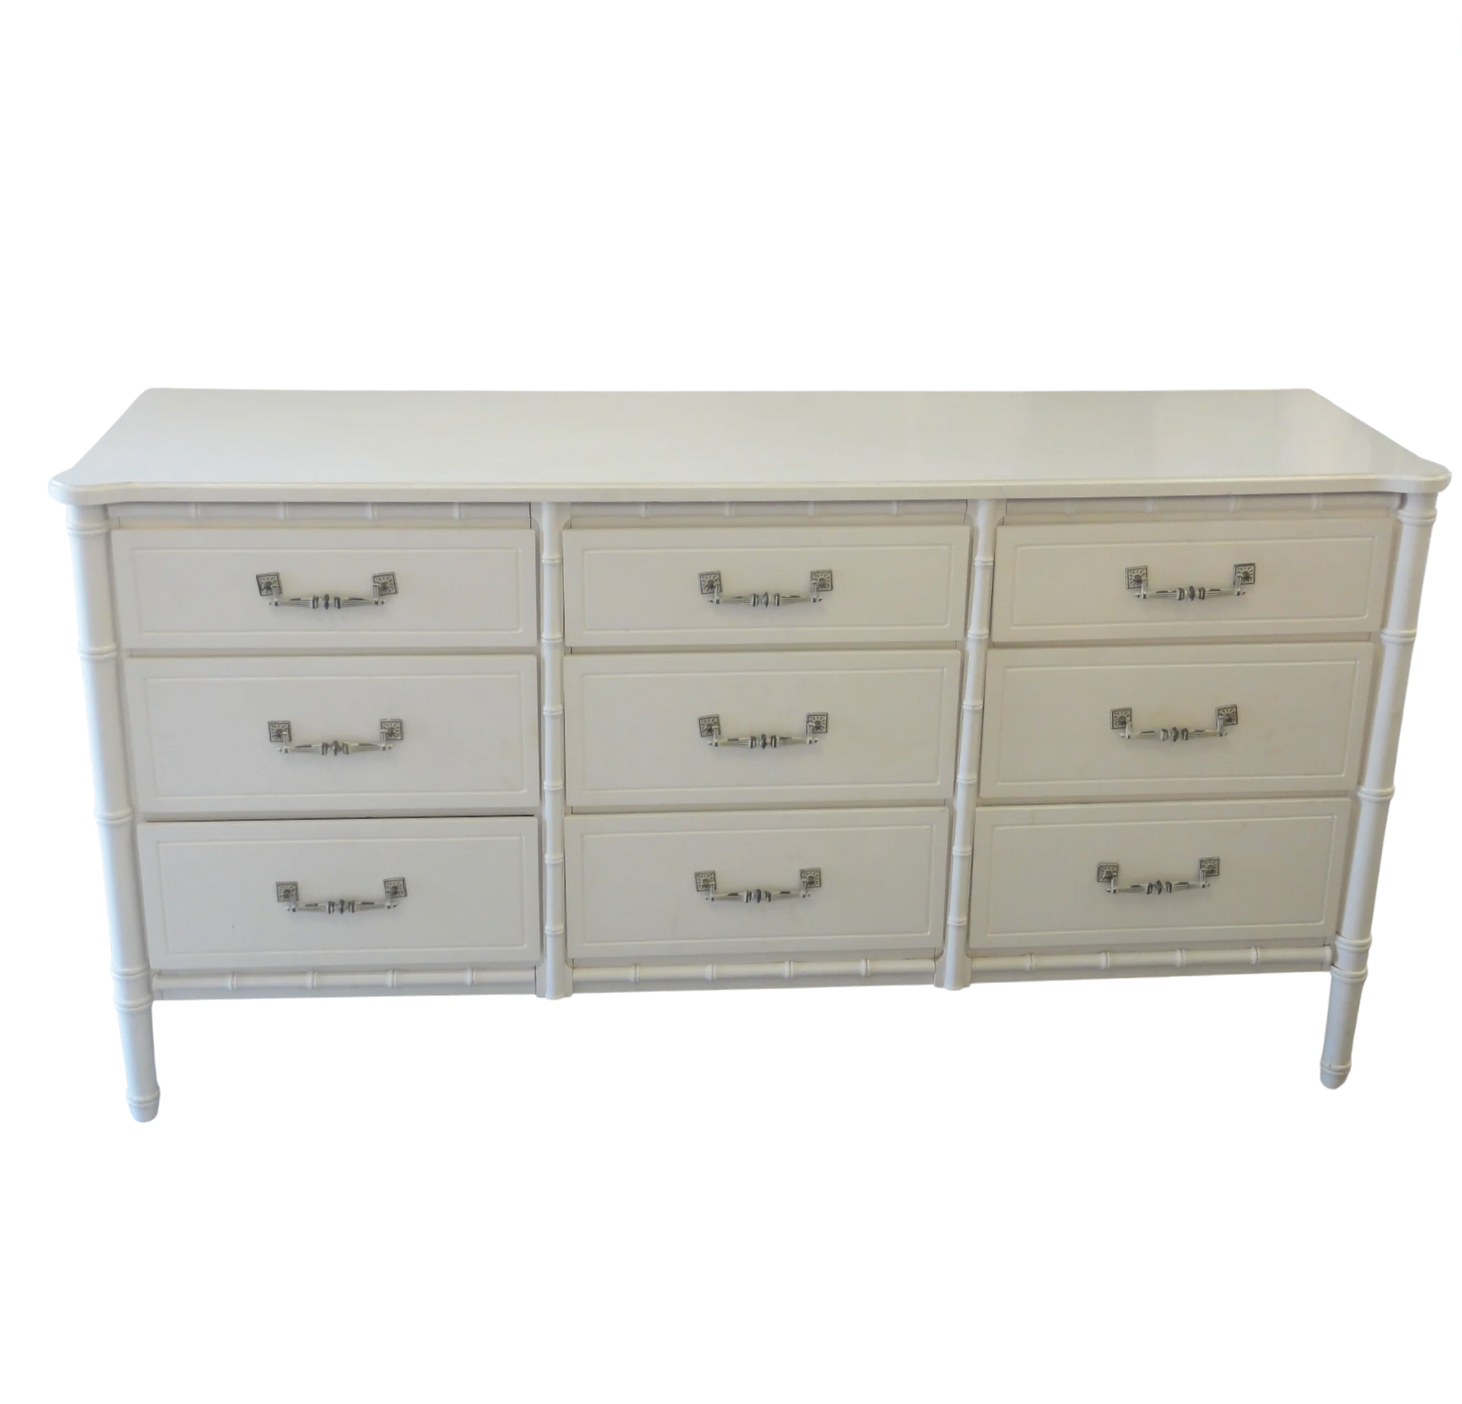 Vintage Classic Faux Bamboo Nine Drawer Dresser Available for Custom Lacquer!